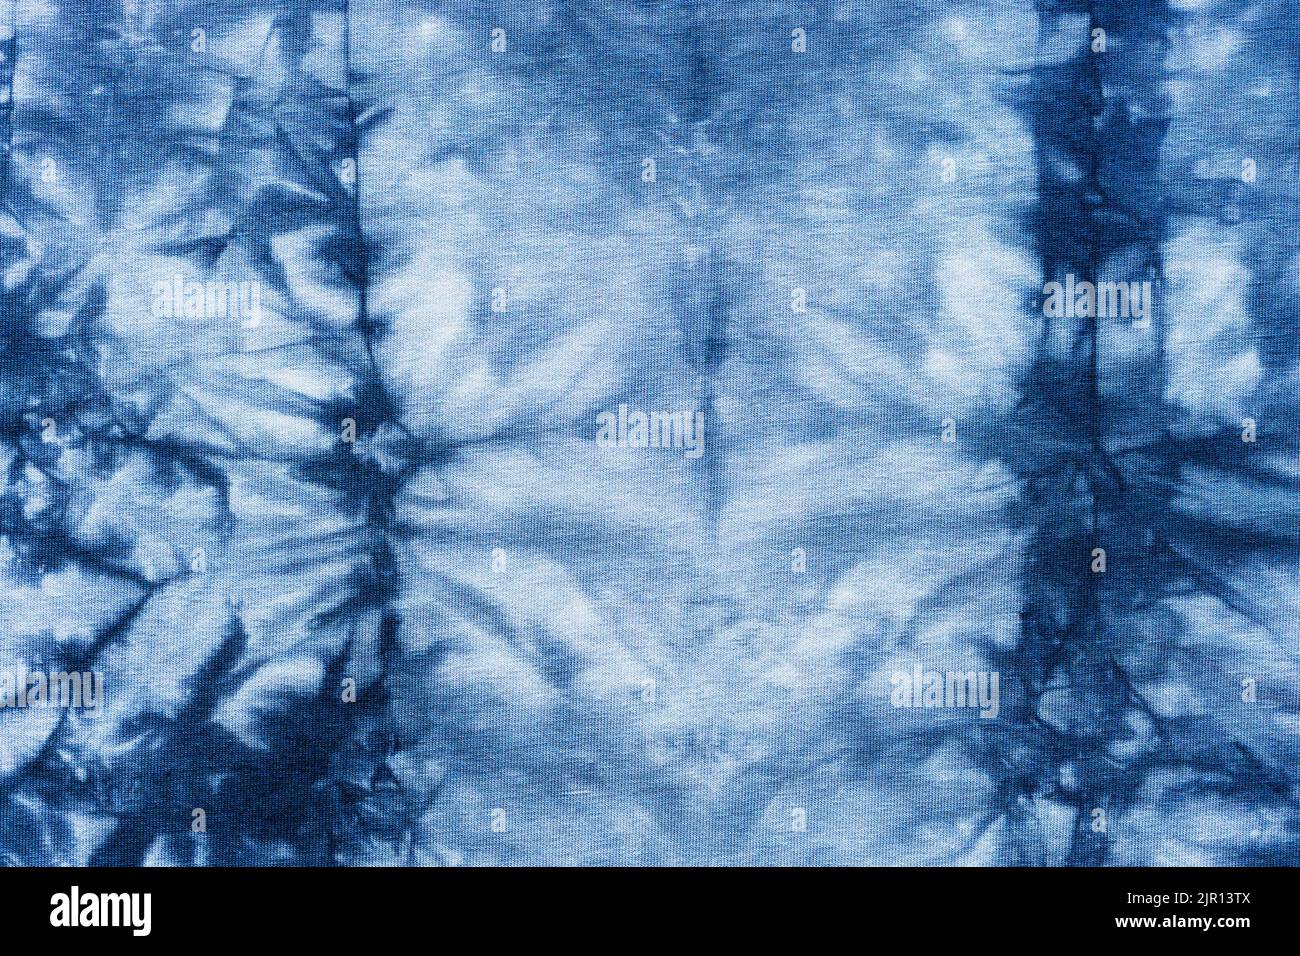 blue gray abstract pattern handcrafted in manual tie-dyeing technique on cotton jersey fabric Stock Photo